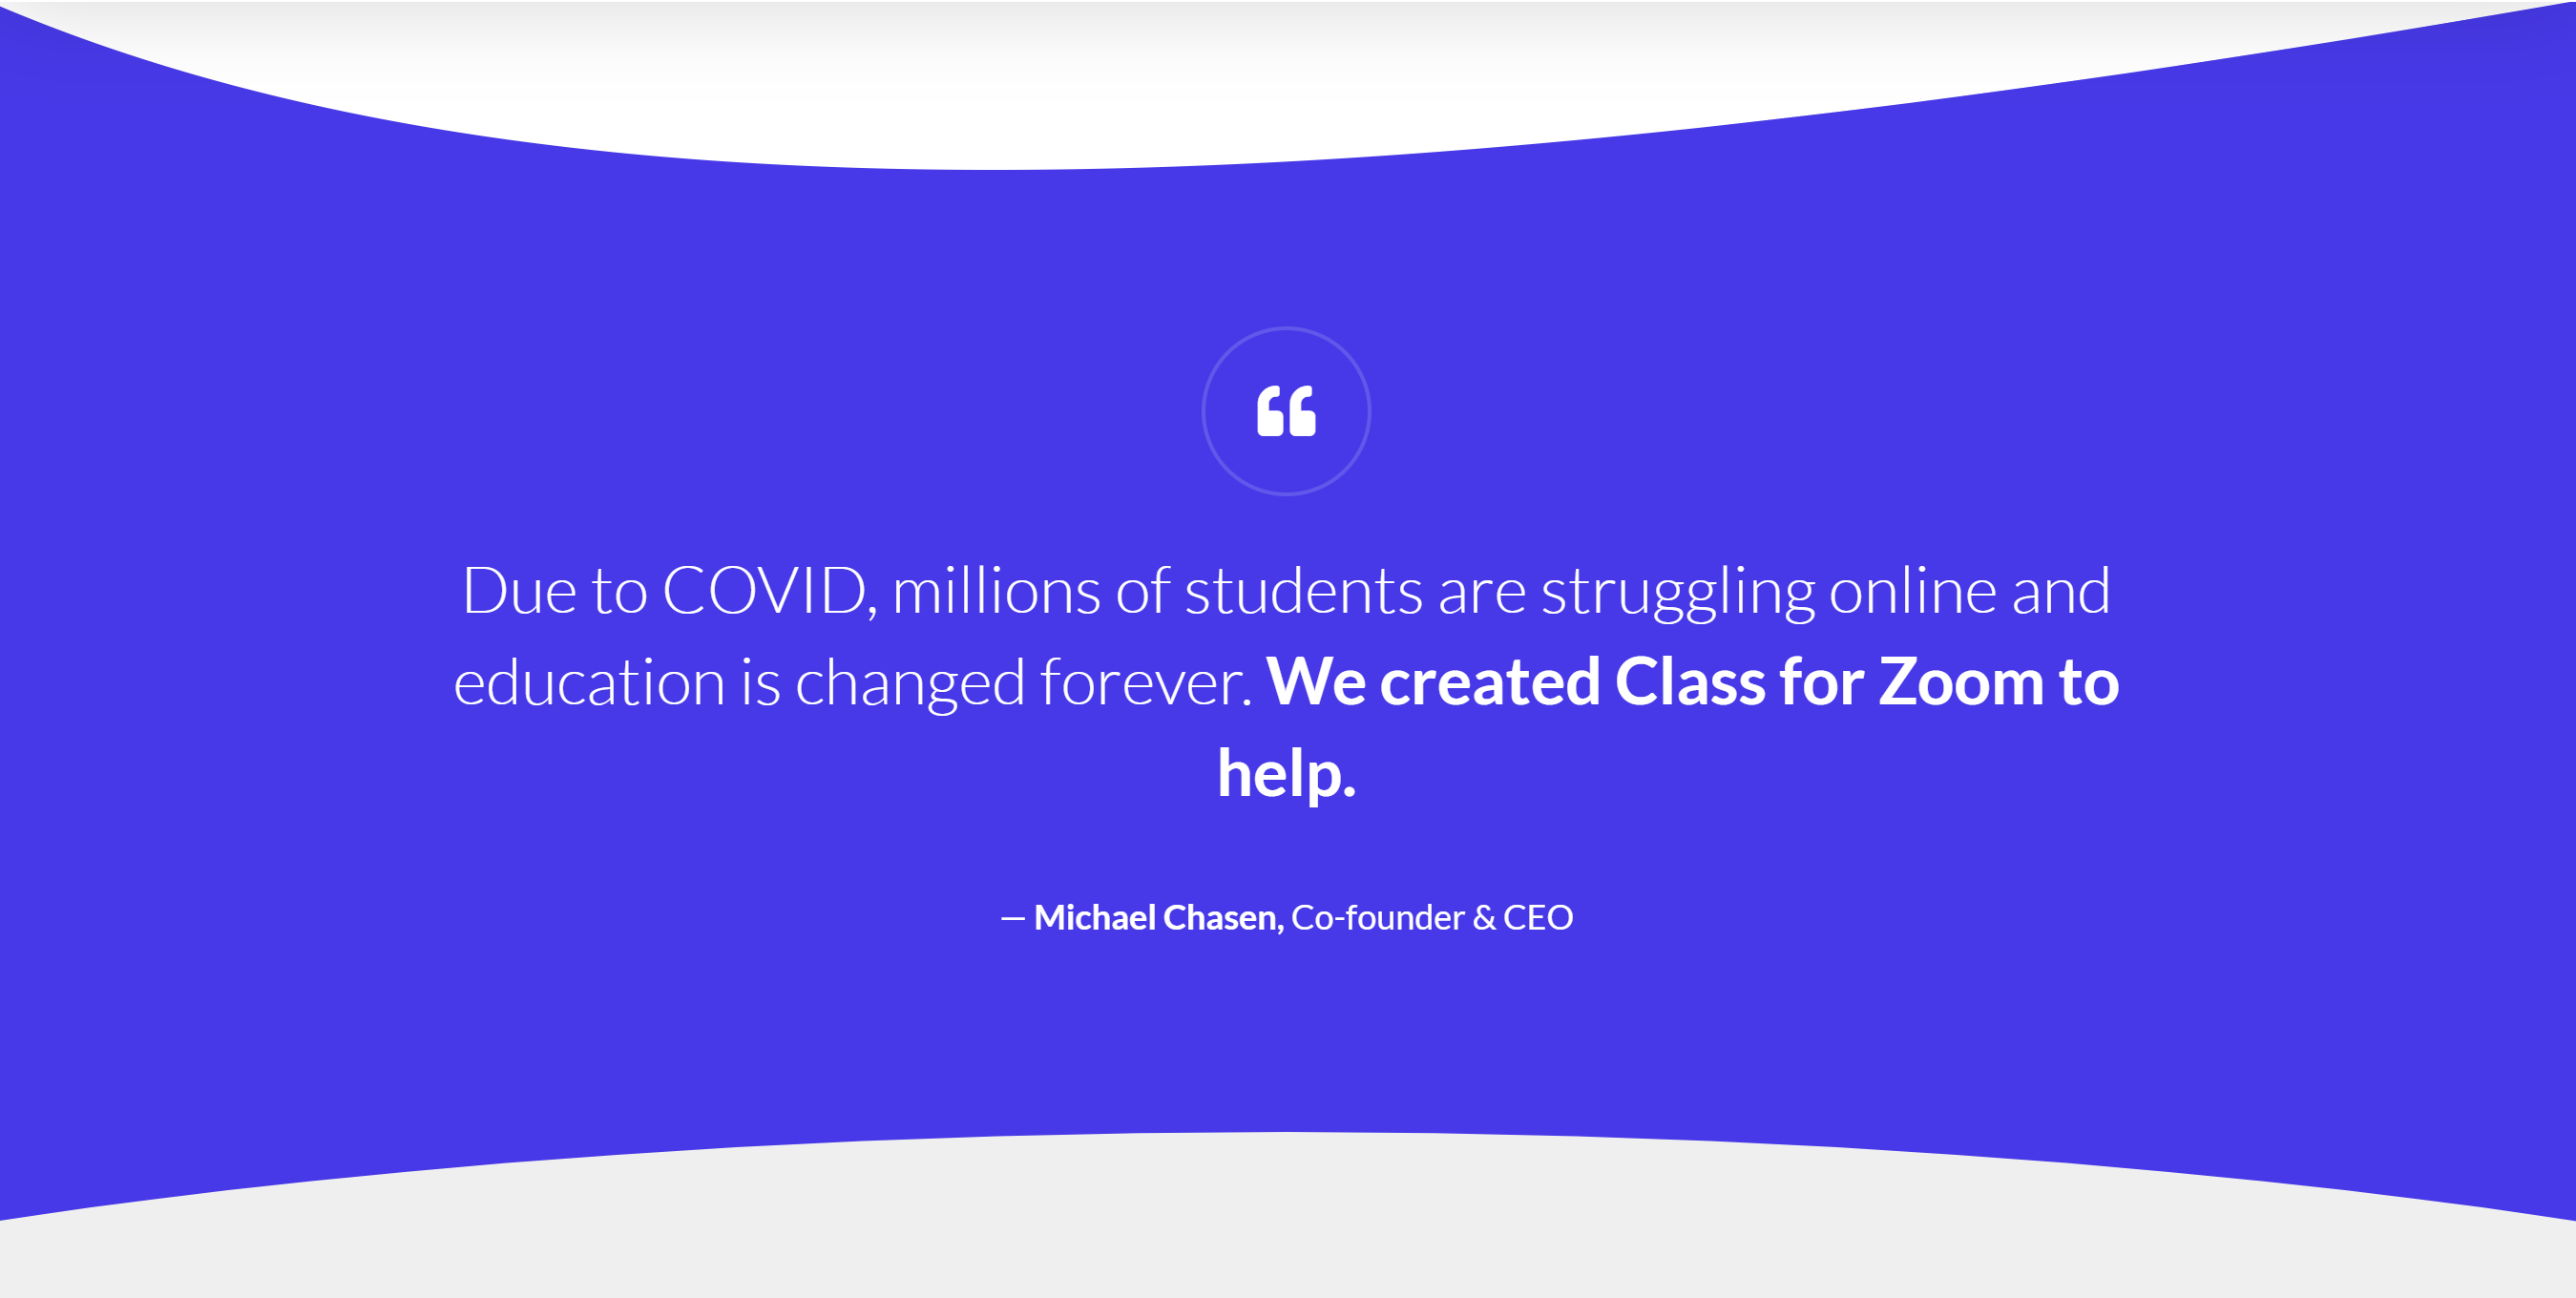 Due to COVID, millions of students are struggling online and education is changed forever. We created Class for Zoom to help.